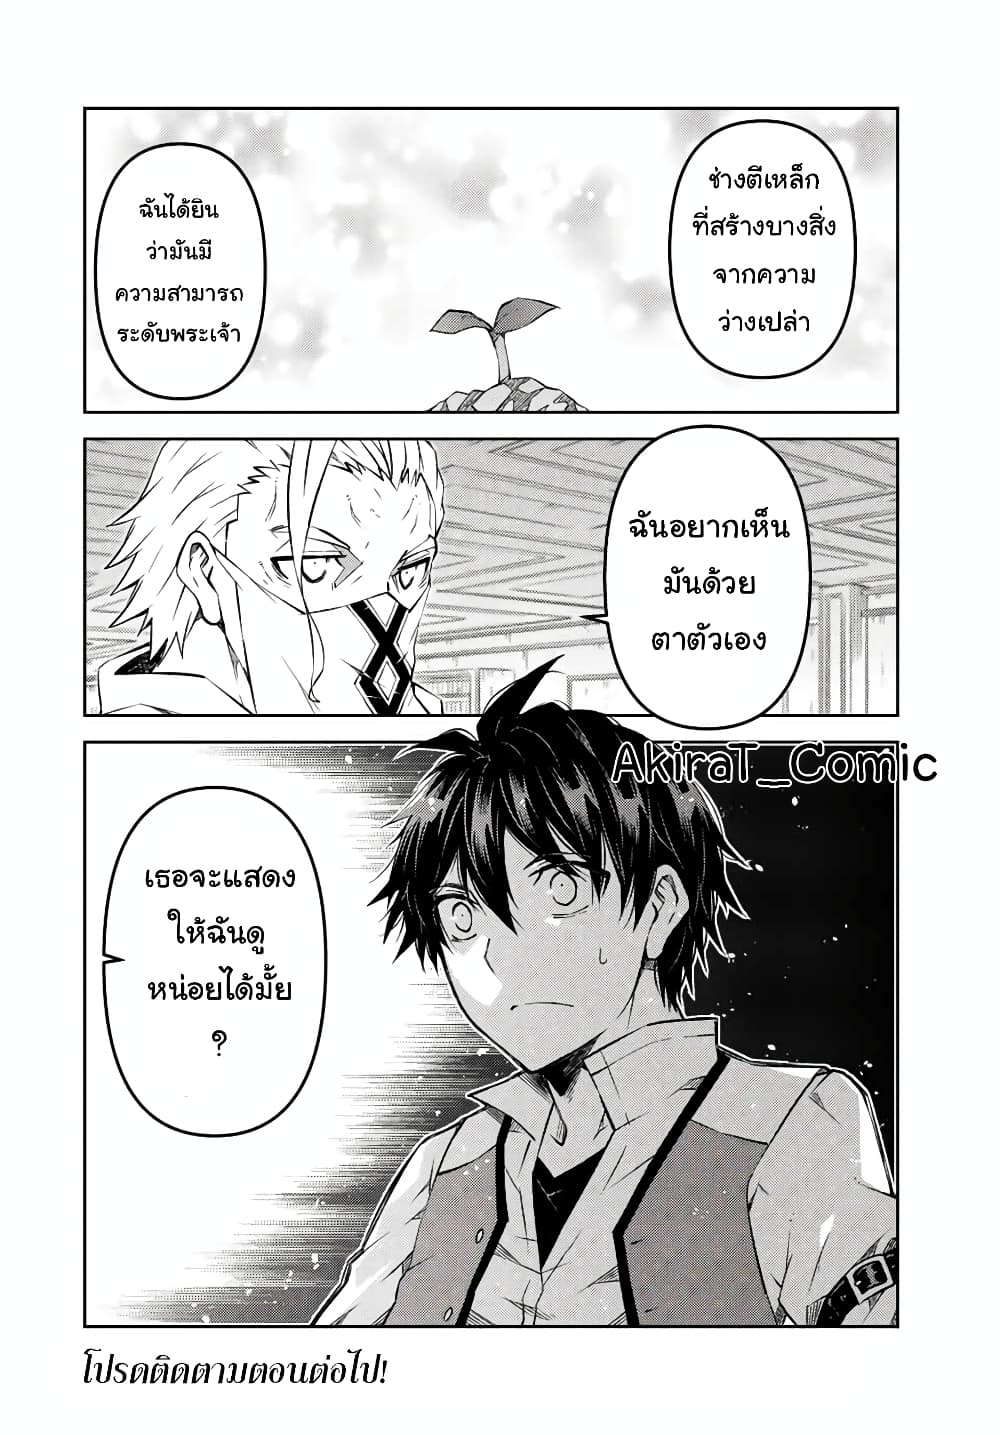 The Weakest Occupation “Blacksmith”, but It’s Actually the Strongest ตอนที่ 95 (11)